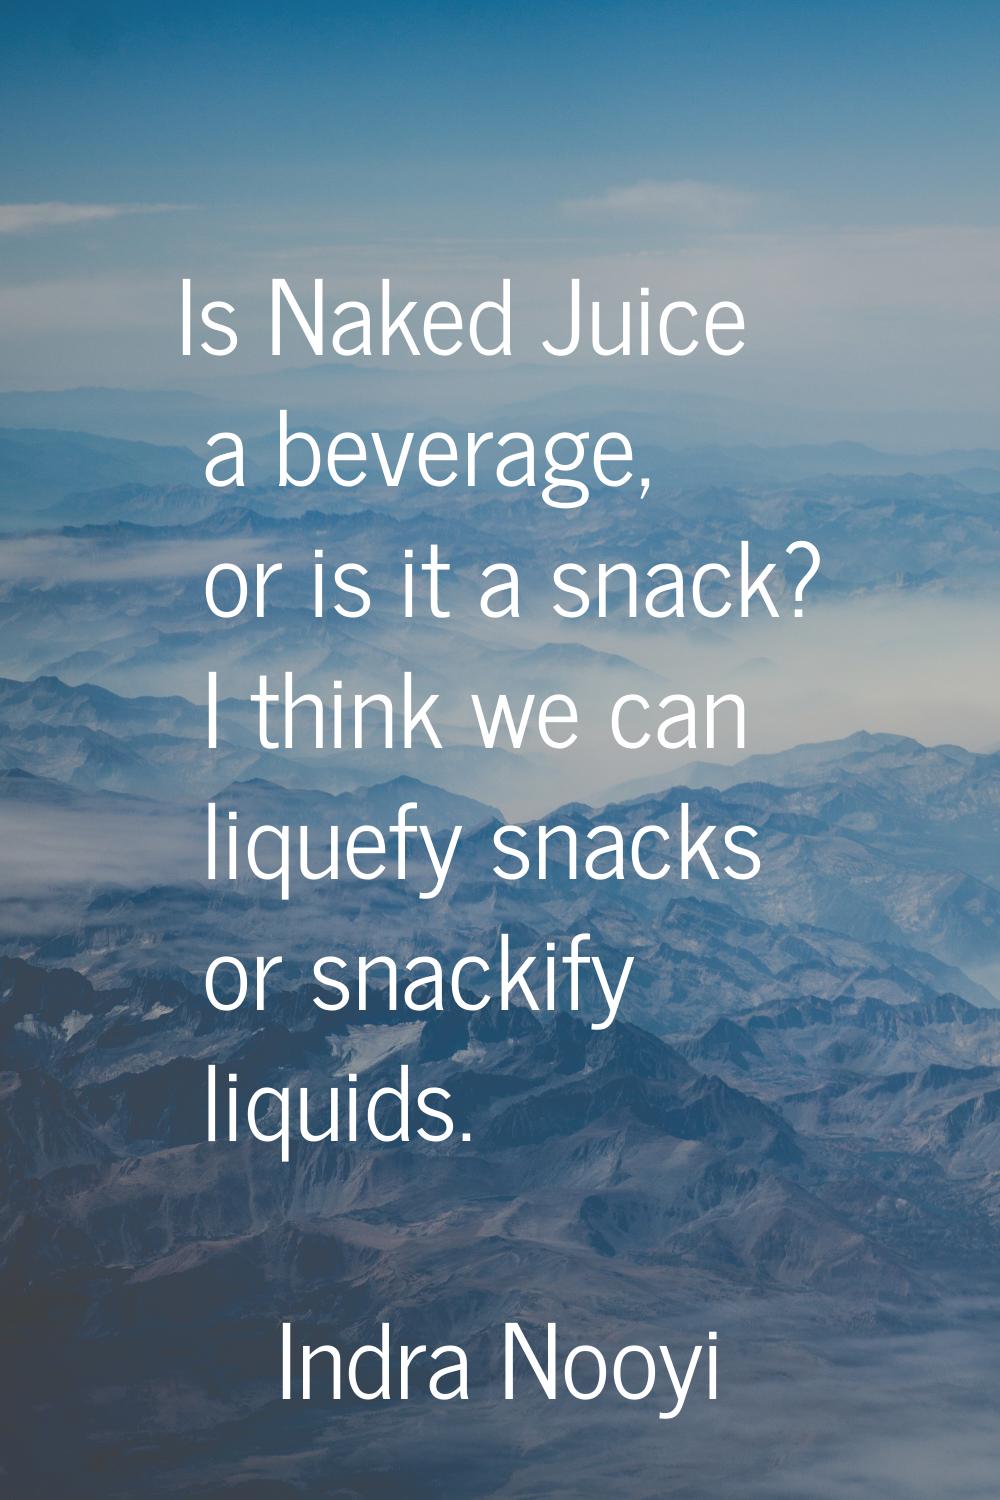 Is Naked Juice a beverage, or is it a snack? I think we can liquefy snacks or snackify liquids.